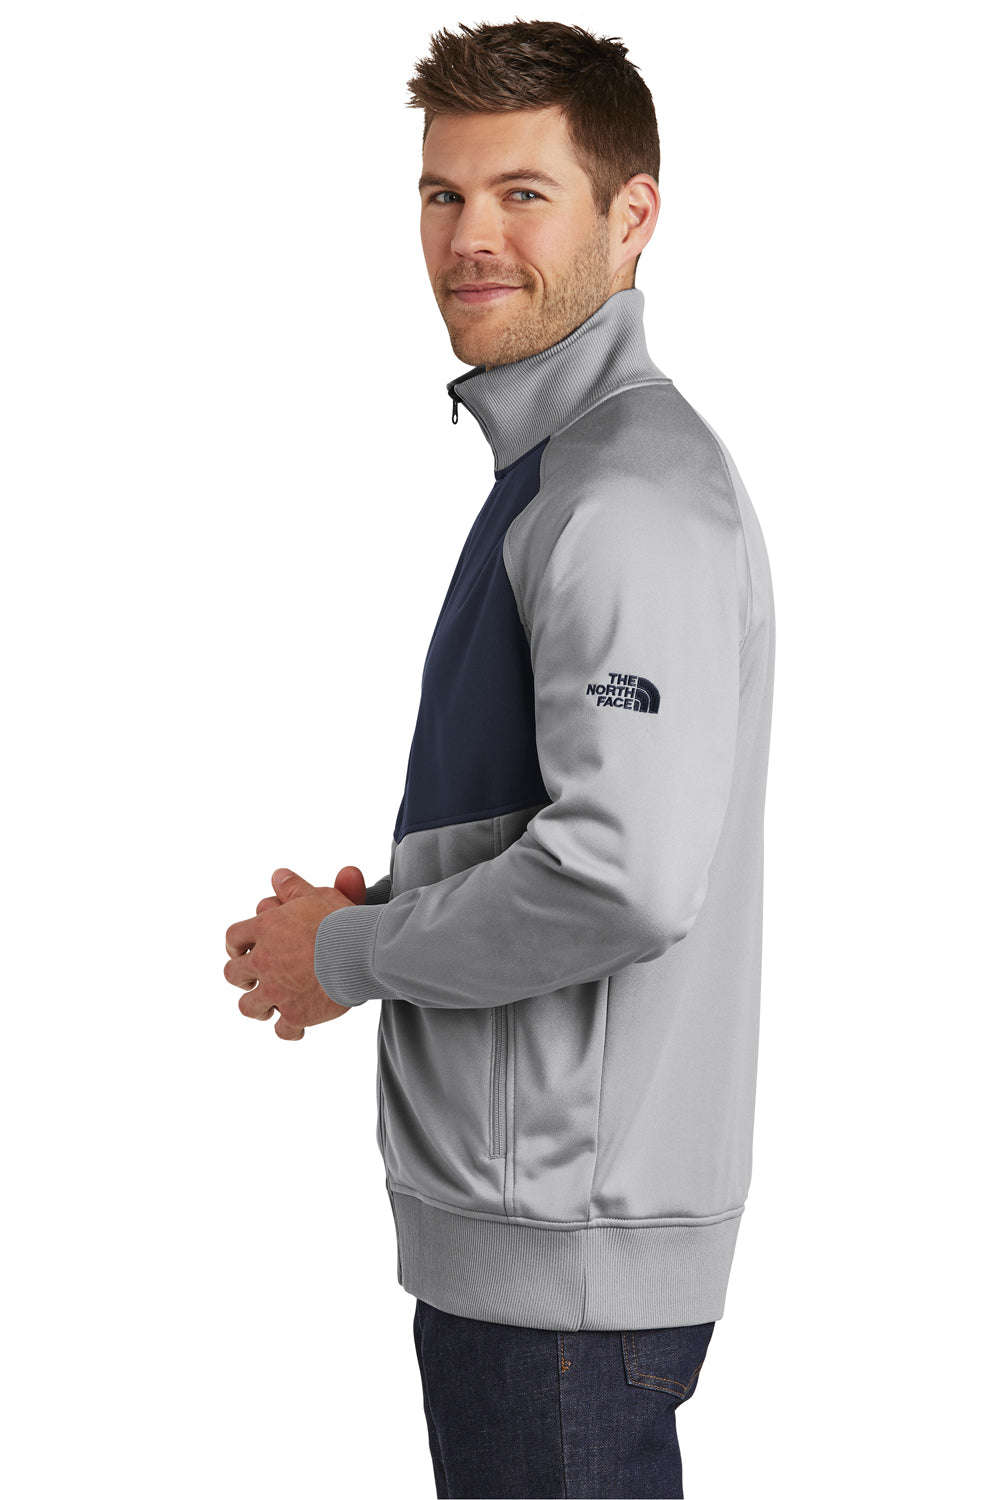 The North Face NF0A3SEW Mens Tech Full Zip Fleece Jacket Mid Grey/Navy Blue Side